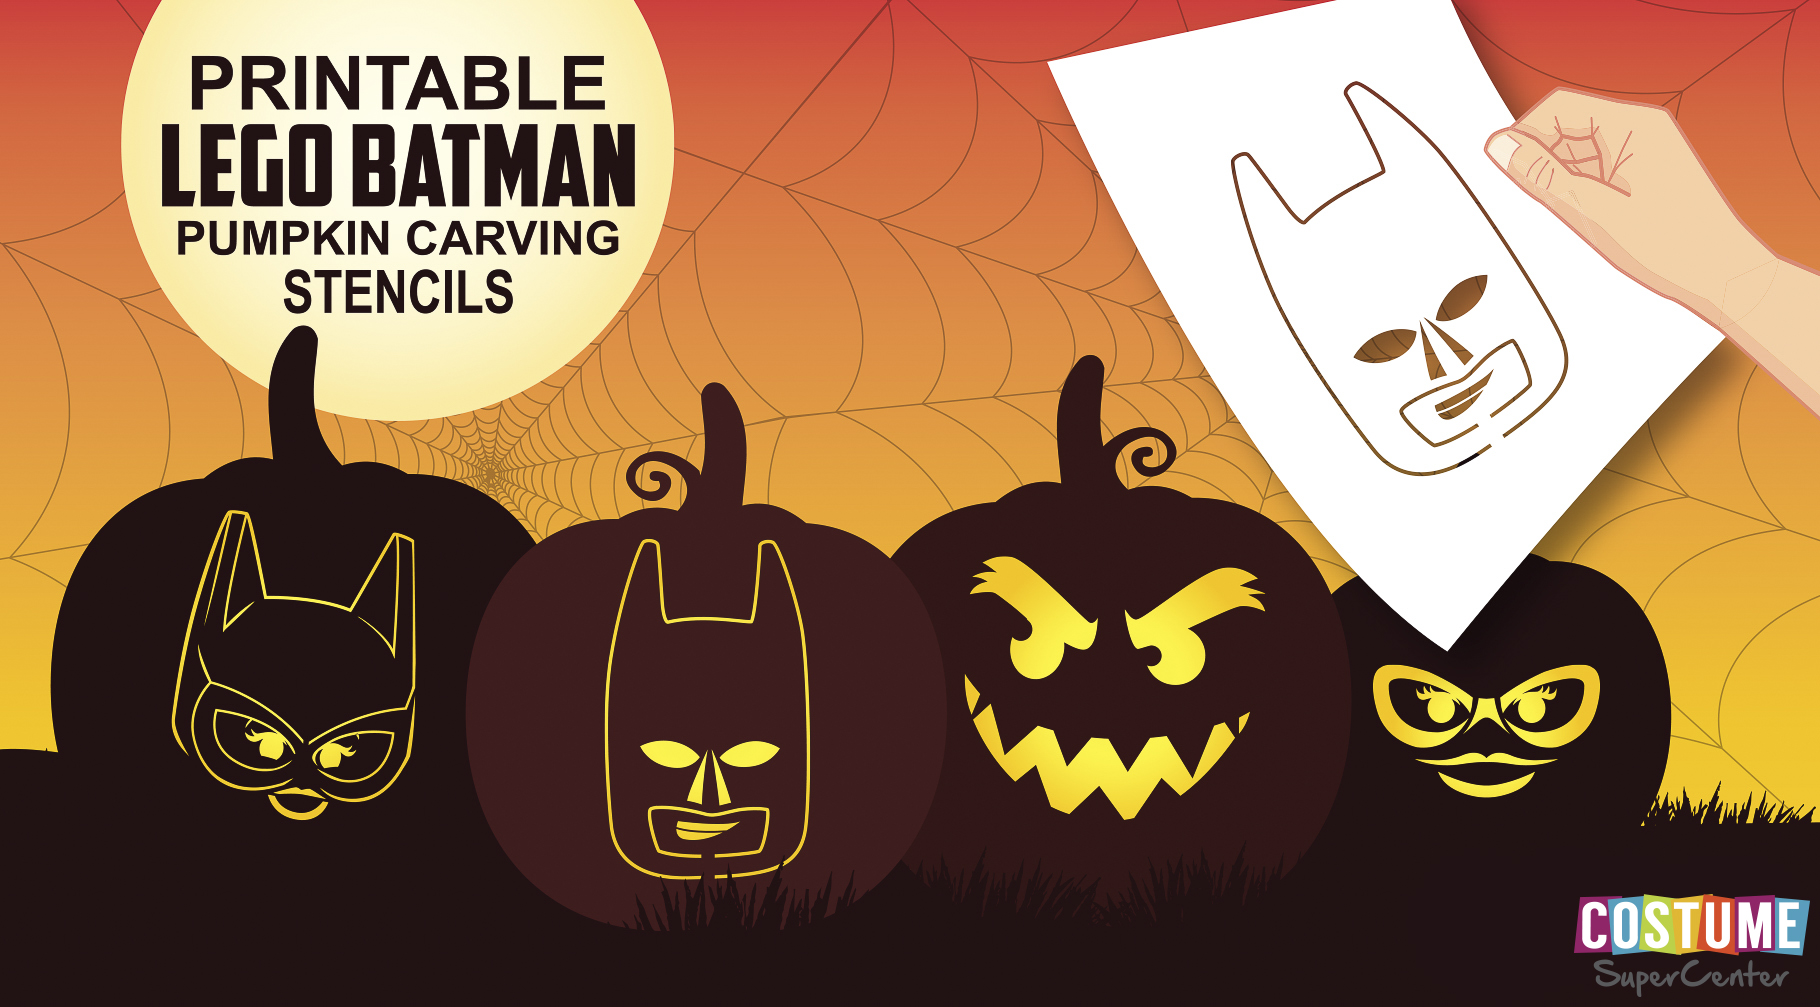 12 Hours of Halloween: These Lego Batman Pumpin Carving Stencils will take  plenty of time to carve